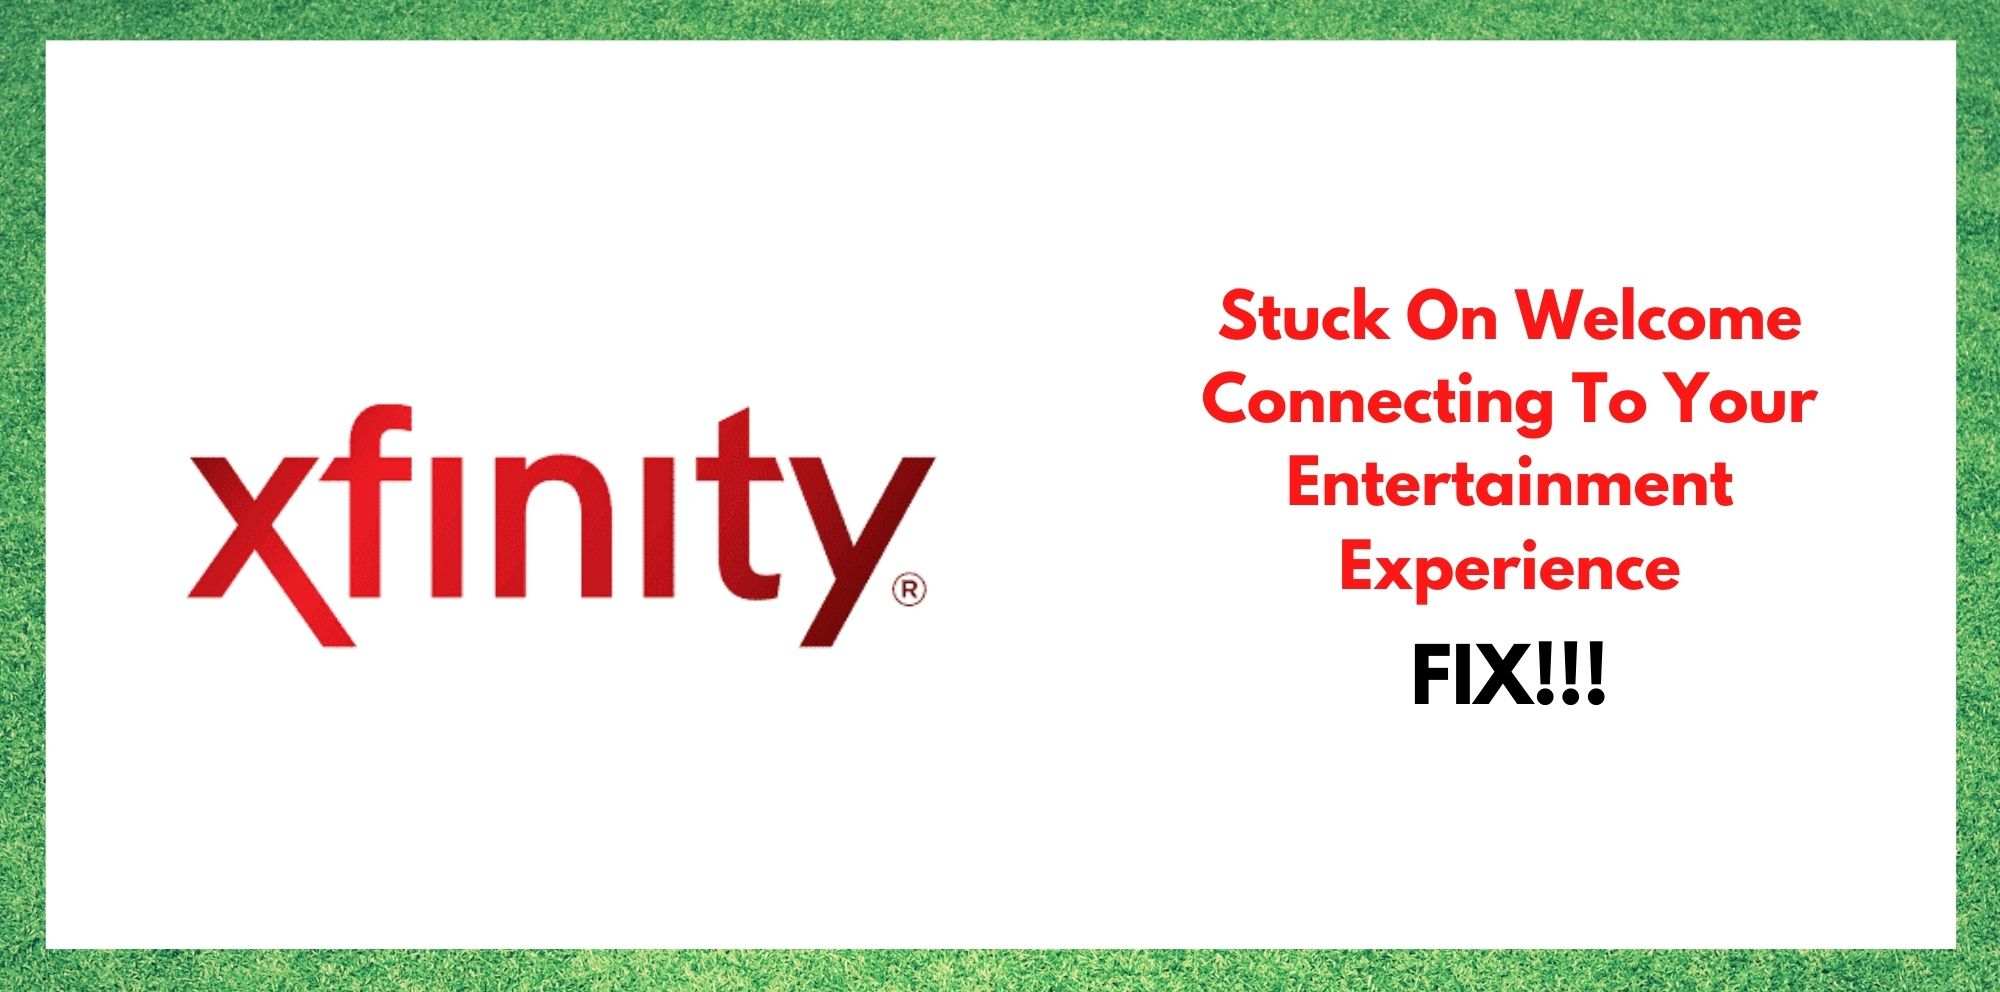 xfinity stuck welcome connecting to your entertainment experience